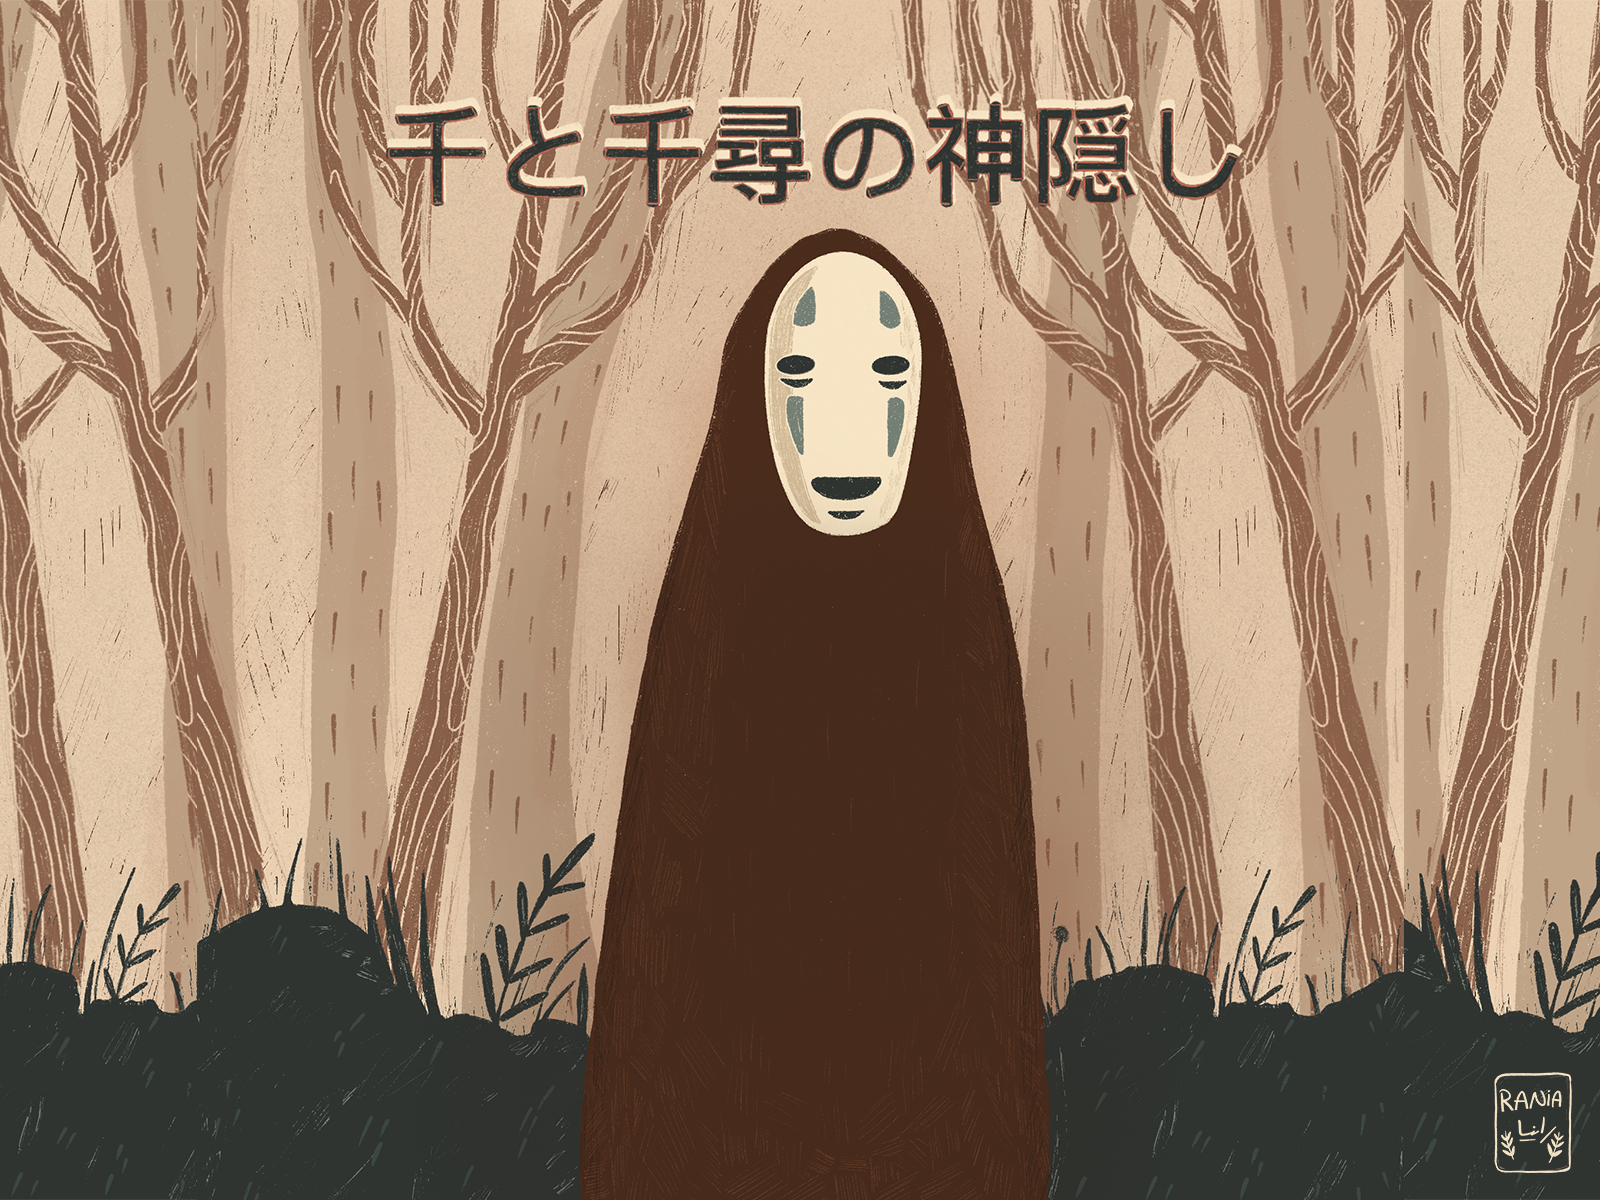 Spirited Away  No Face カオナシ by Rania Younis on Dribbble